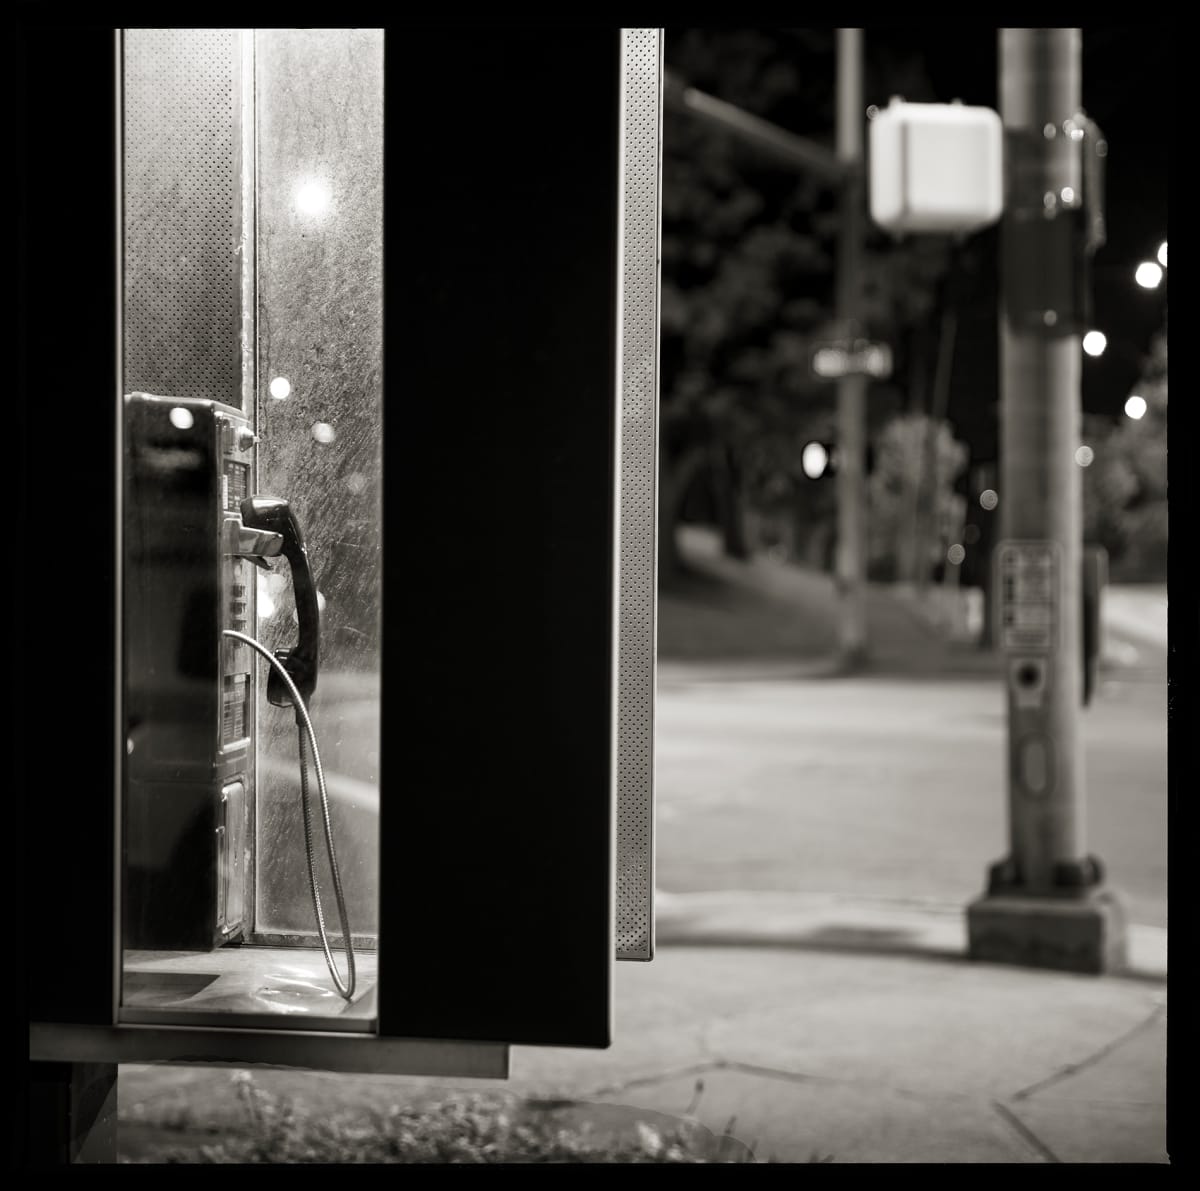 585.271.9197 – Clar’s Elmwood Automotive, 870 Elmwood Avenue, Rochester, NY 14620 by Eric T. Kunsman  Image: ID: A black and white image shows a payphone through the side of the glass booth.  The image is at night, but there is a street light behind the payphone lighting it up.  The payphone is on the left of the image and a telephone pole is to the right.  This is on a street corner.